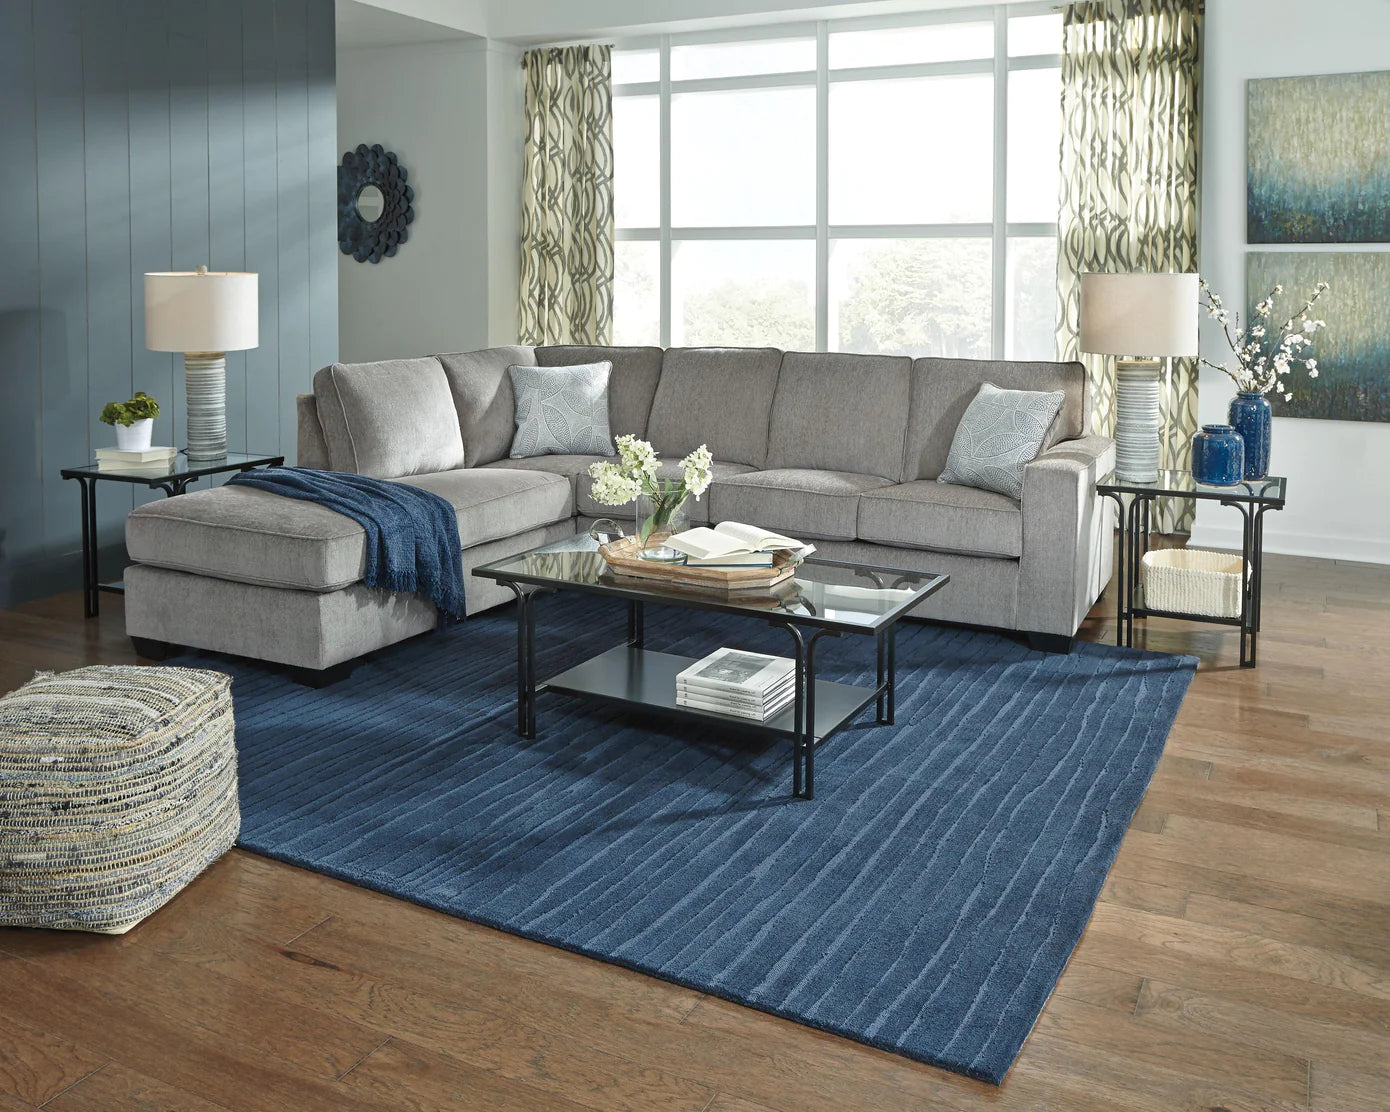 Sectional Selection Guide: Your Ideal Living Room Companion